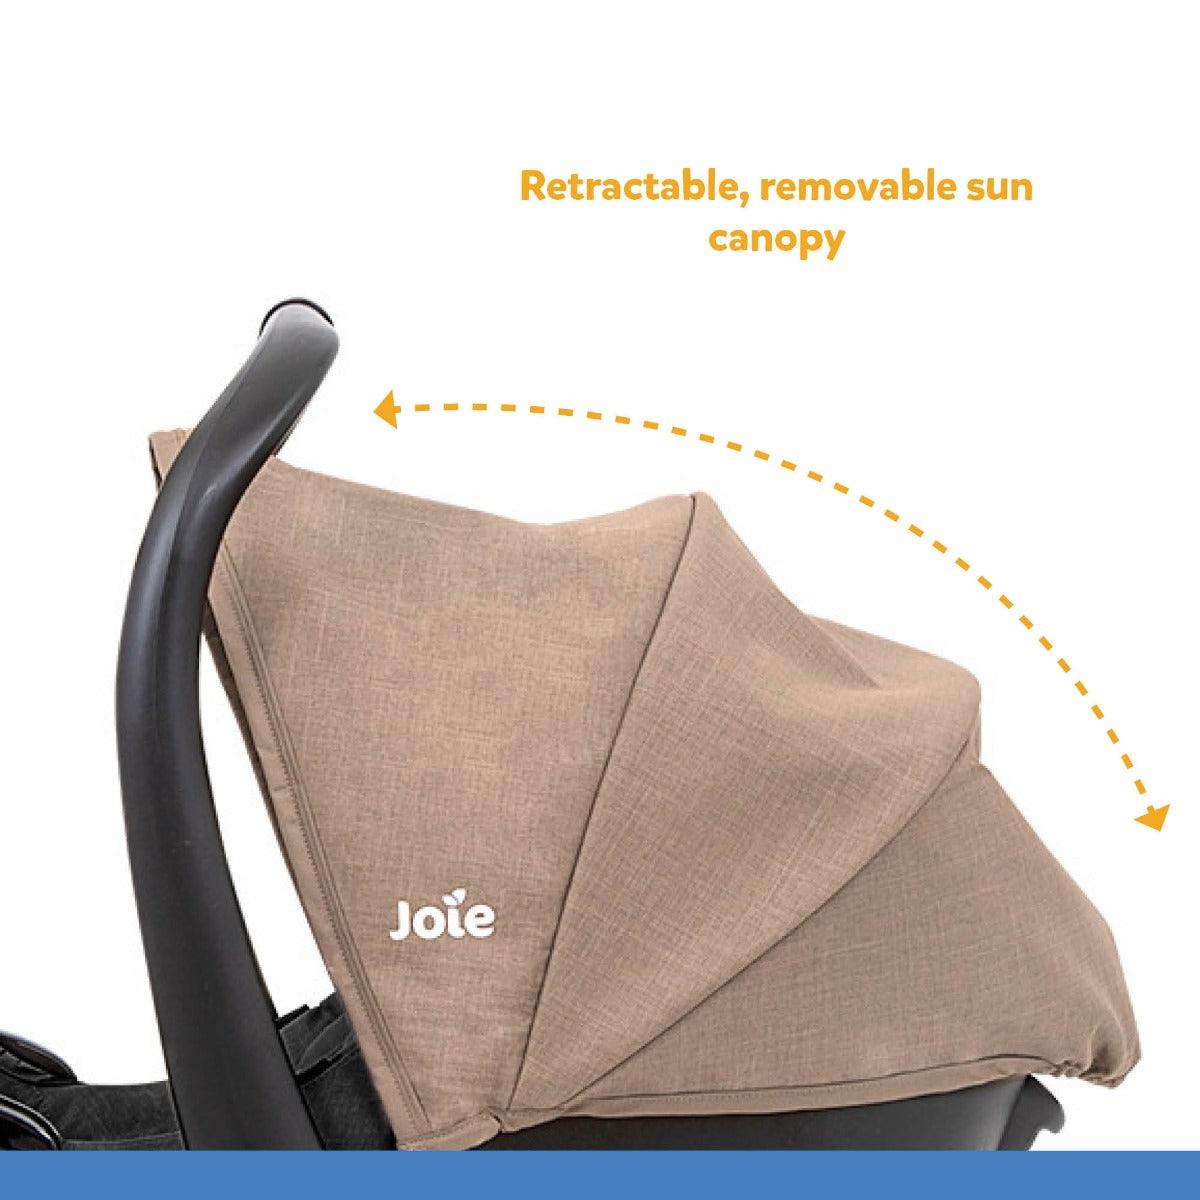 Joie Gemm Infant Carrier Mushroom - Suitable Rearward Facing Birth for Ages 0-1 Years